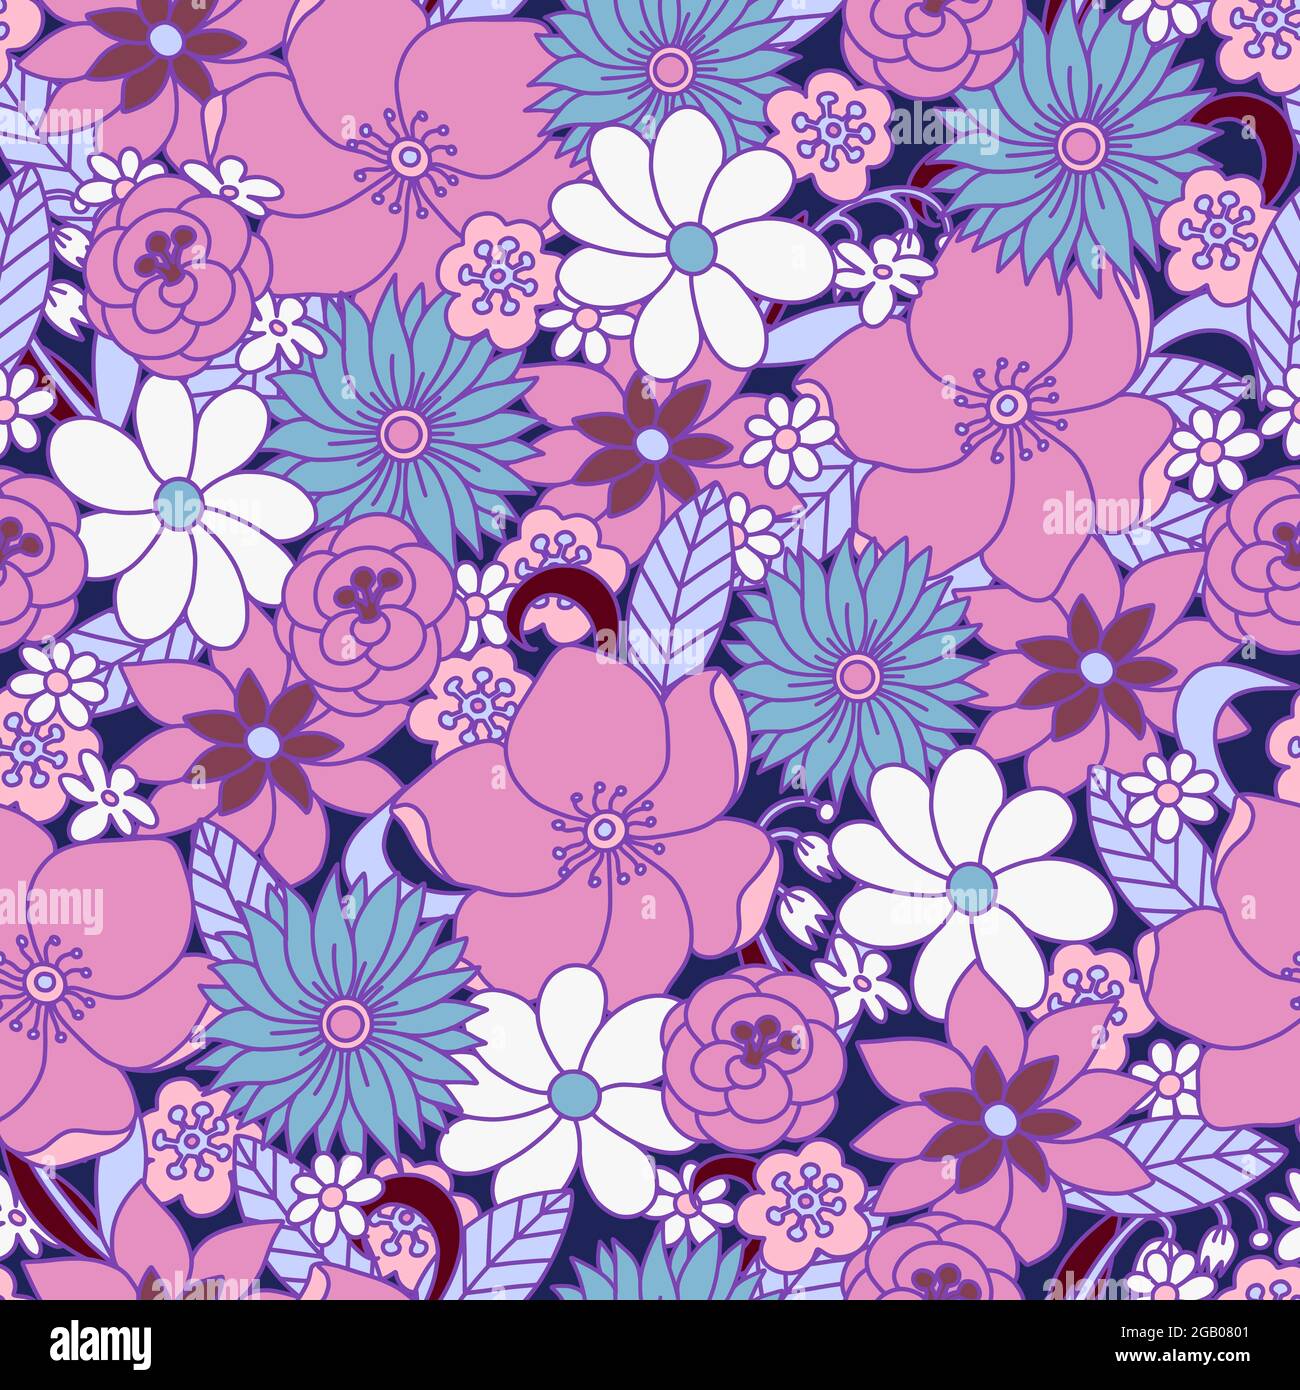 Seamless pattern with simple flowers. Floral print hippie 60s. Stock Vector